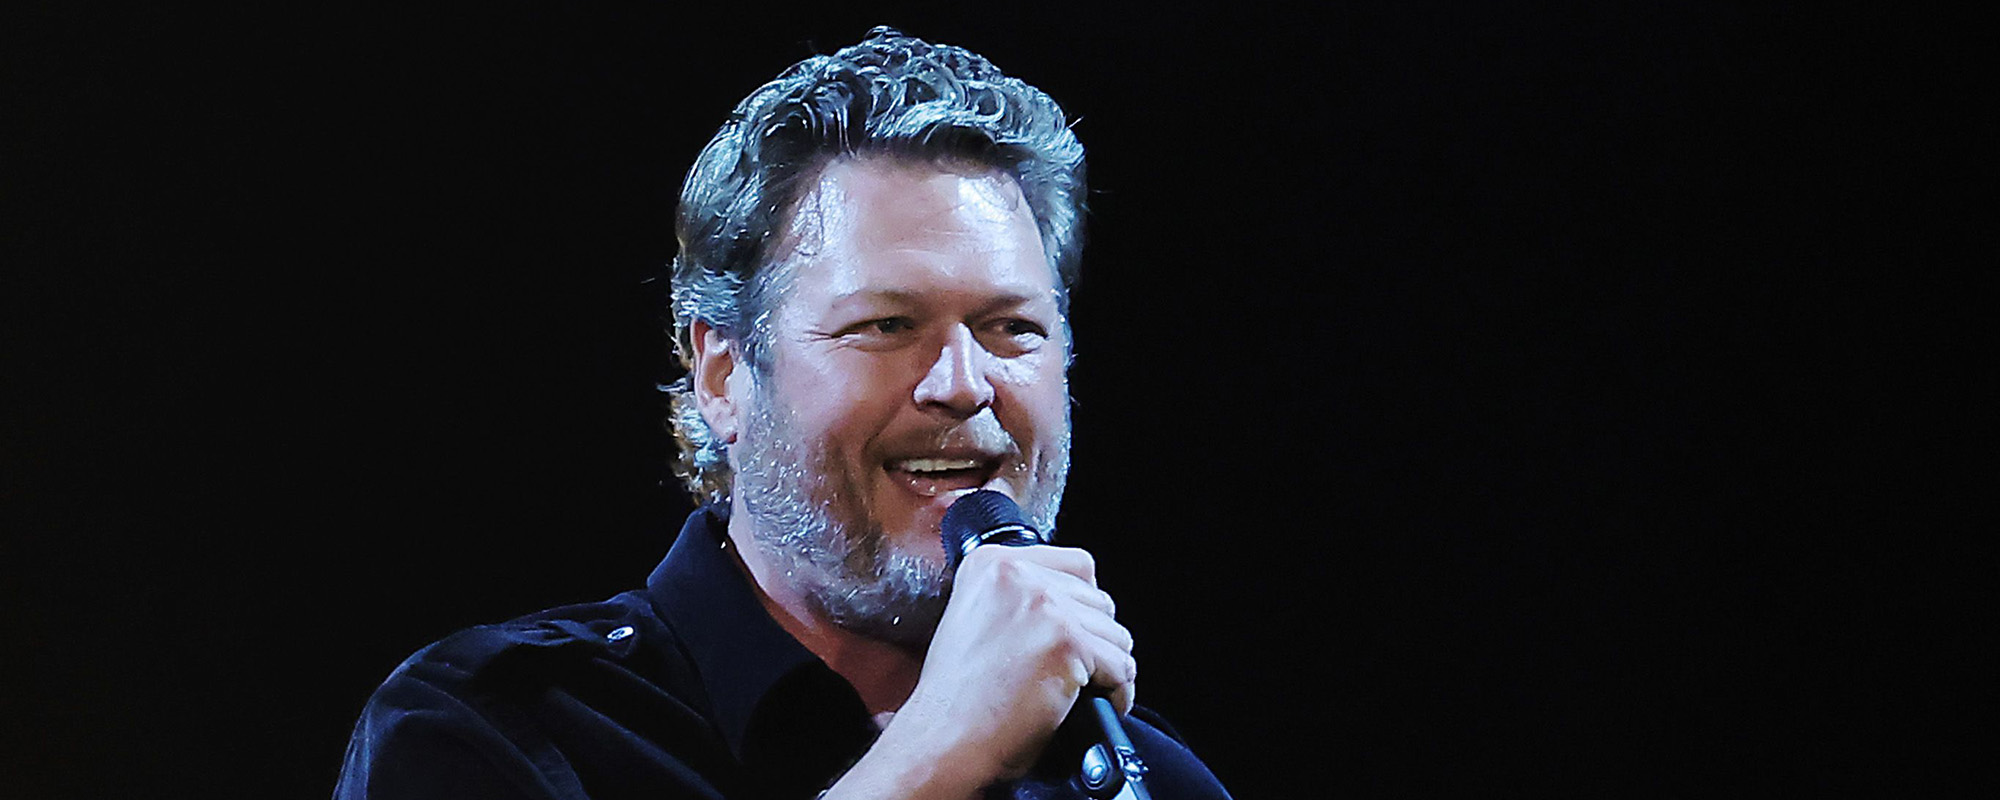 Blake Shelton and Carly Pearce Join Nashville’s New Year’s Eve Lineup